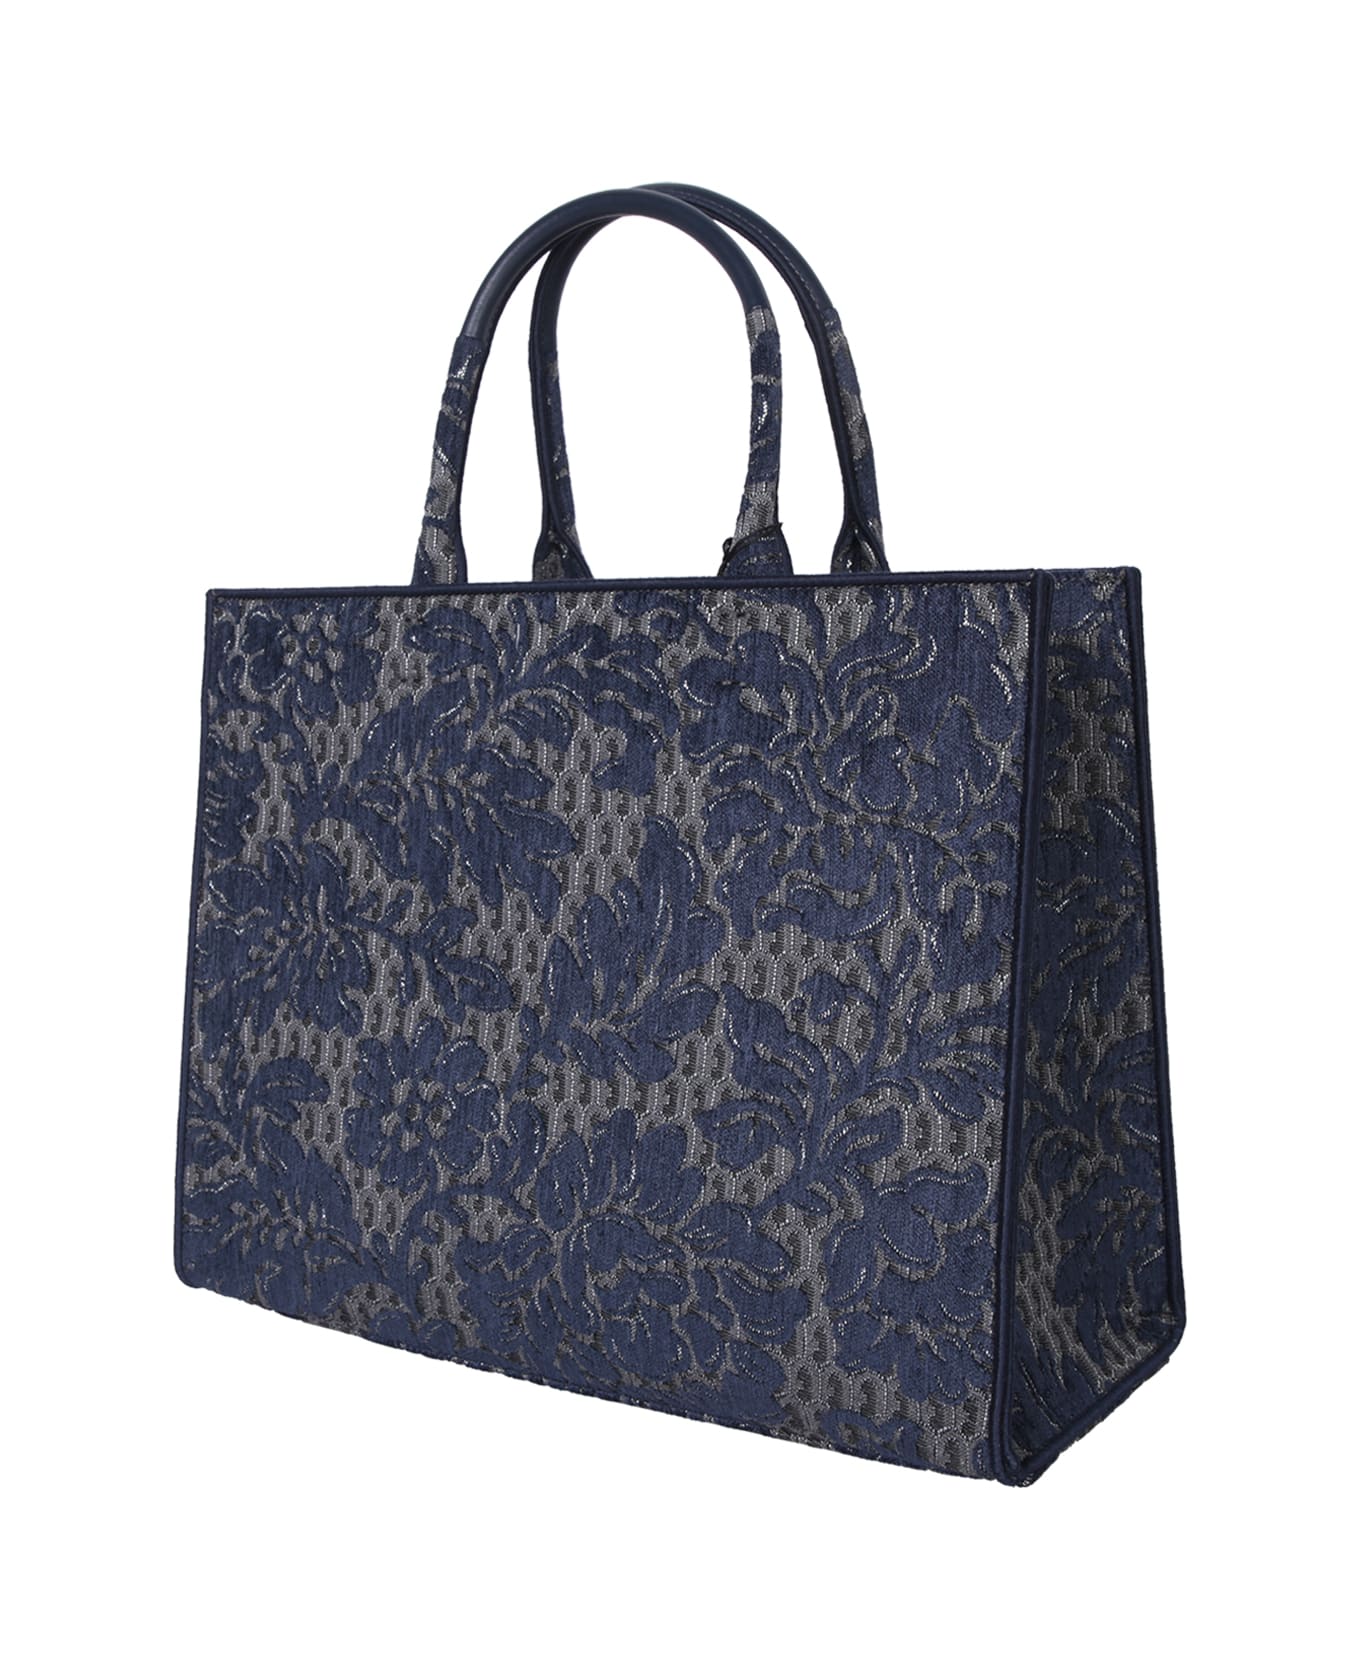 Furla Opportunity Jacquard Blue Tote - Blue トートバッグ